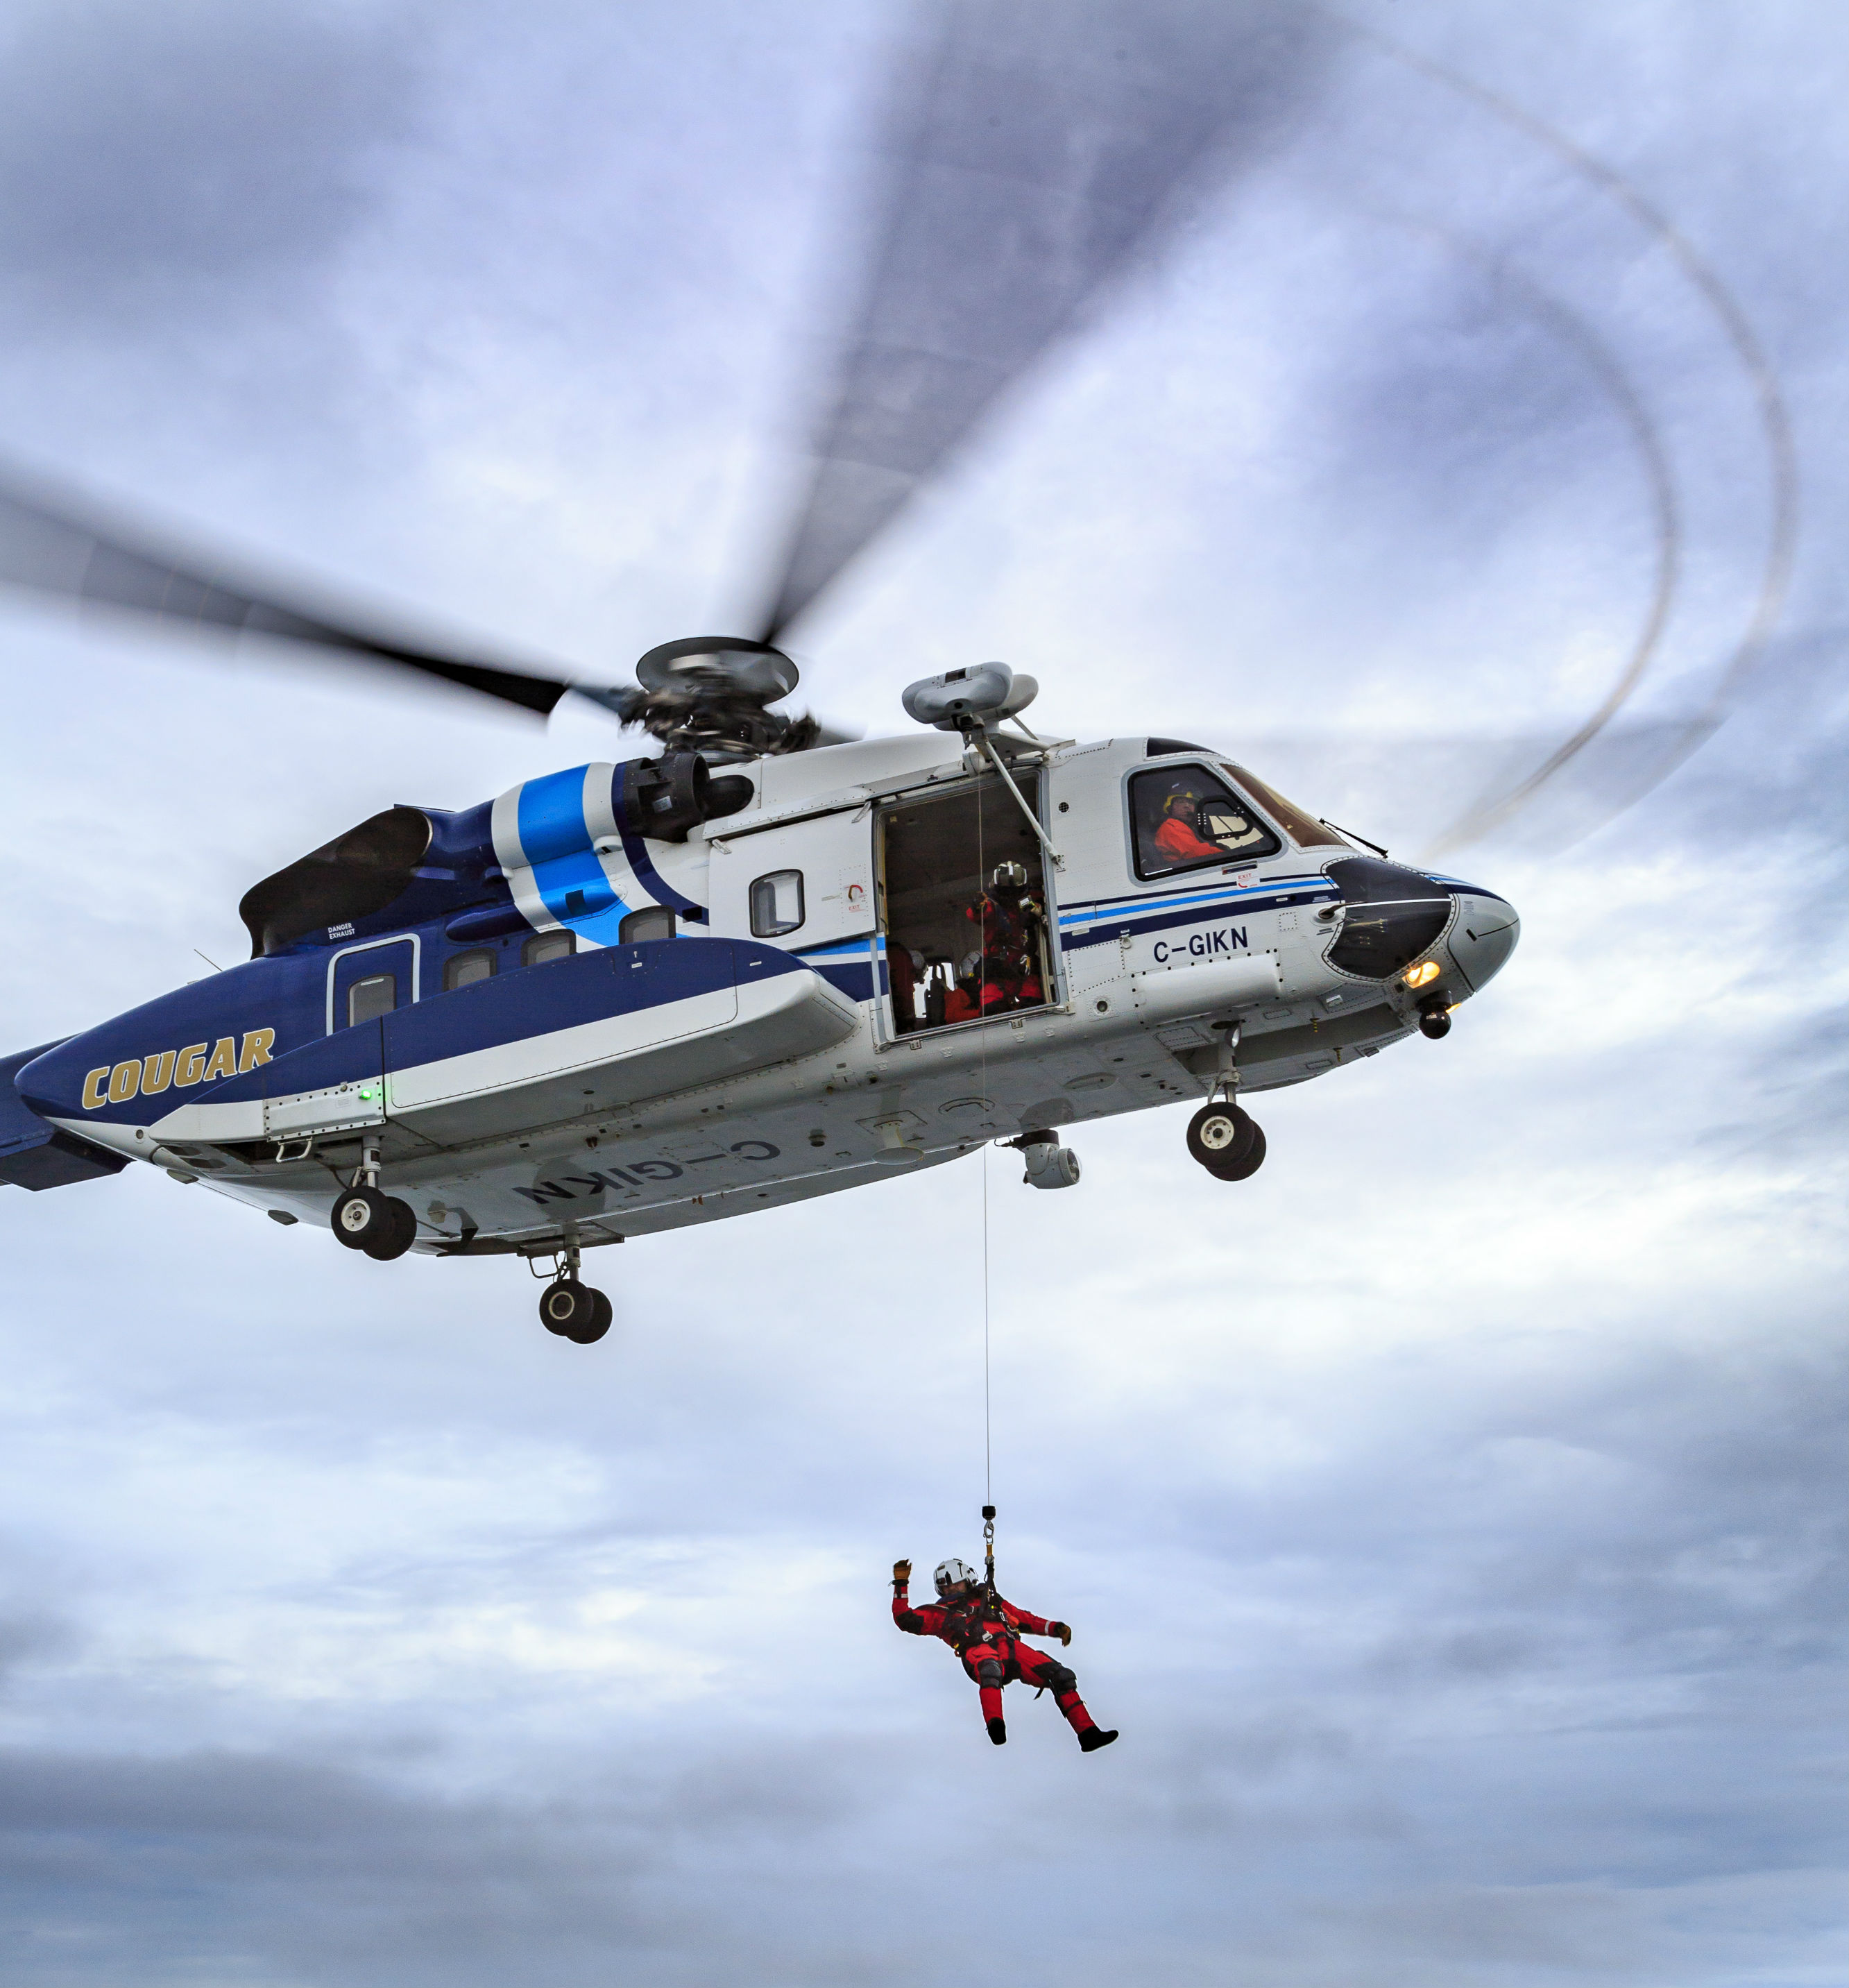 The multi-mission S-92 aircraft is the preferred aircraft of its size class for offshore oil worker transportation and search-and-rescue. Heath Moffatt Photo